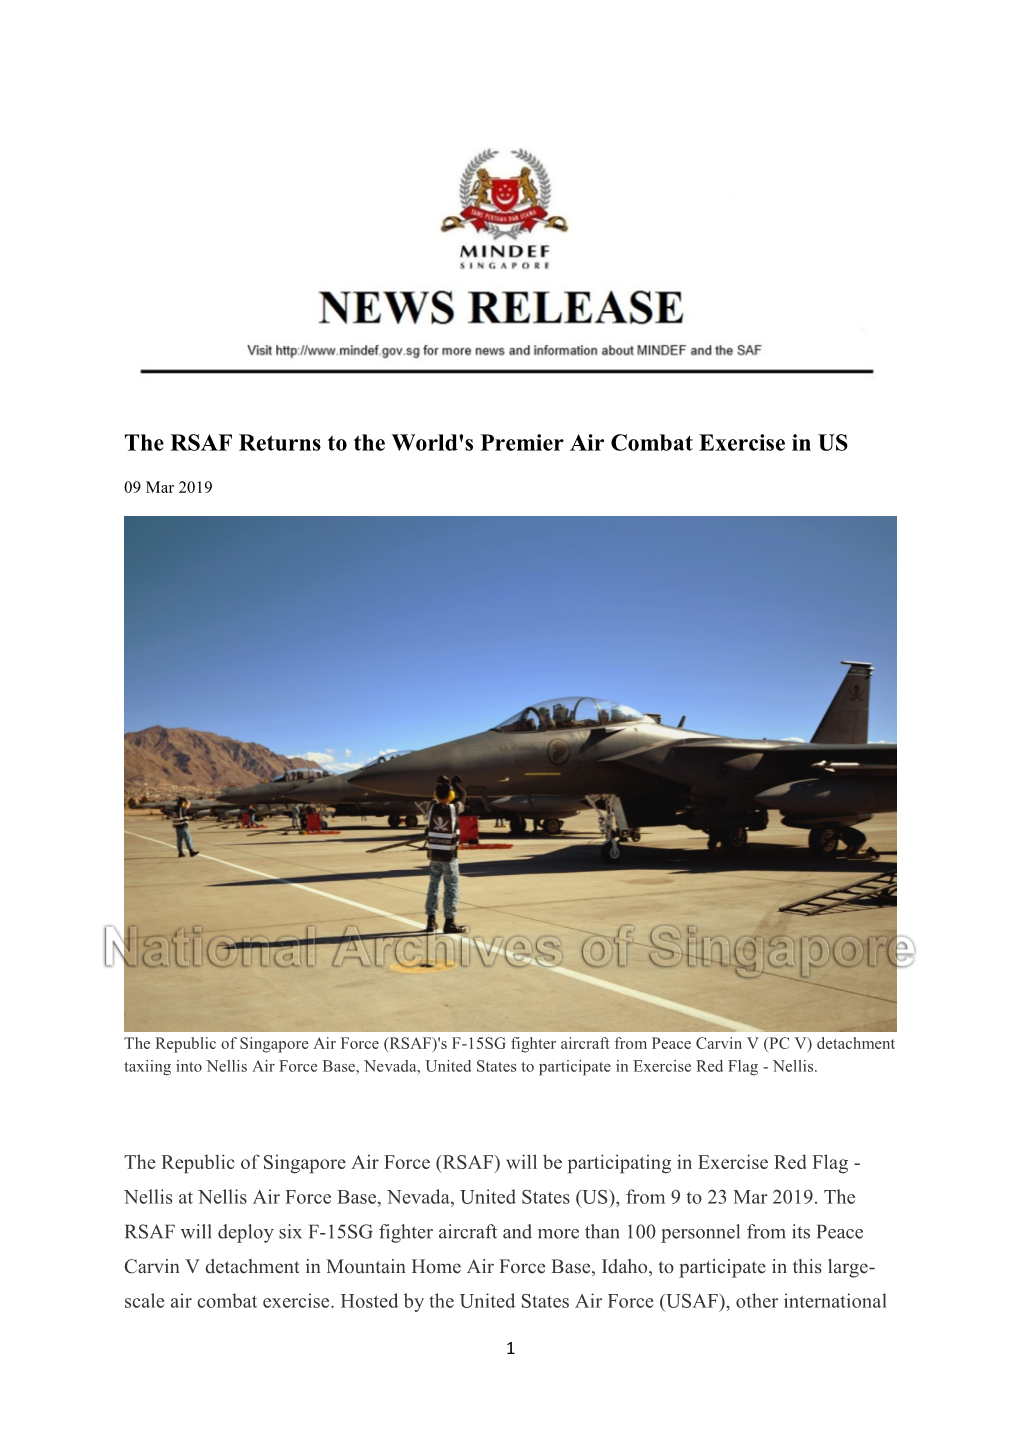 The RSAF Returns to the World's Premier Air Combat Exercise in US